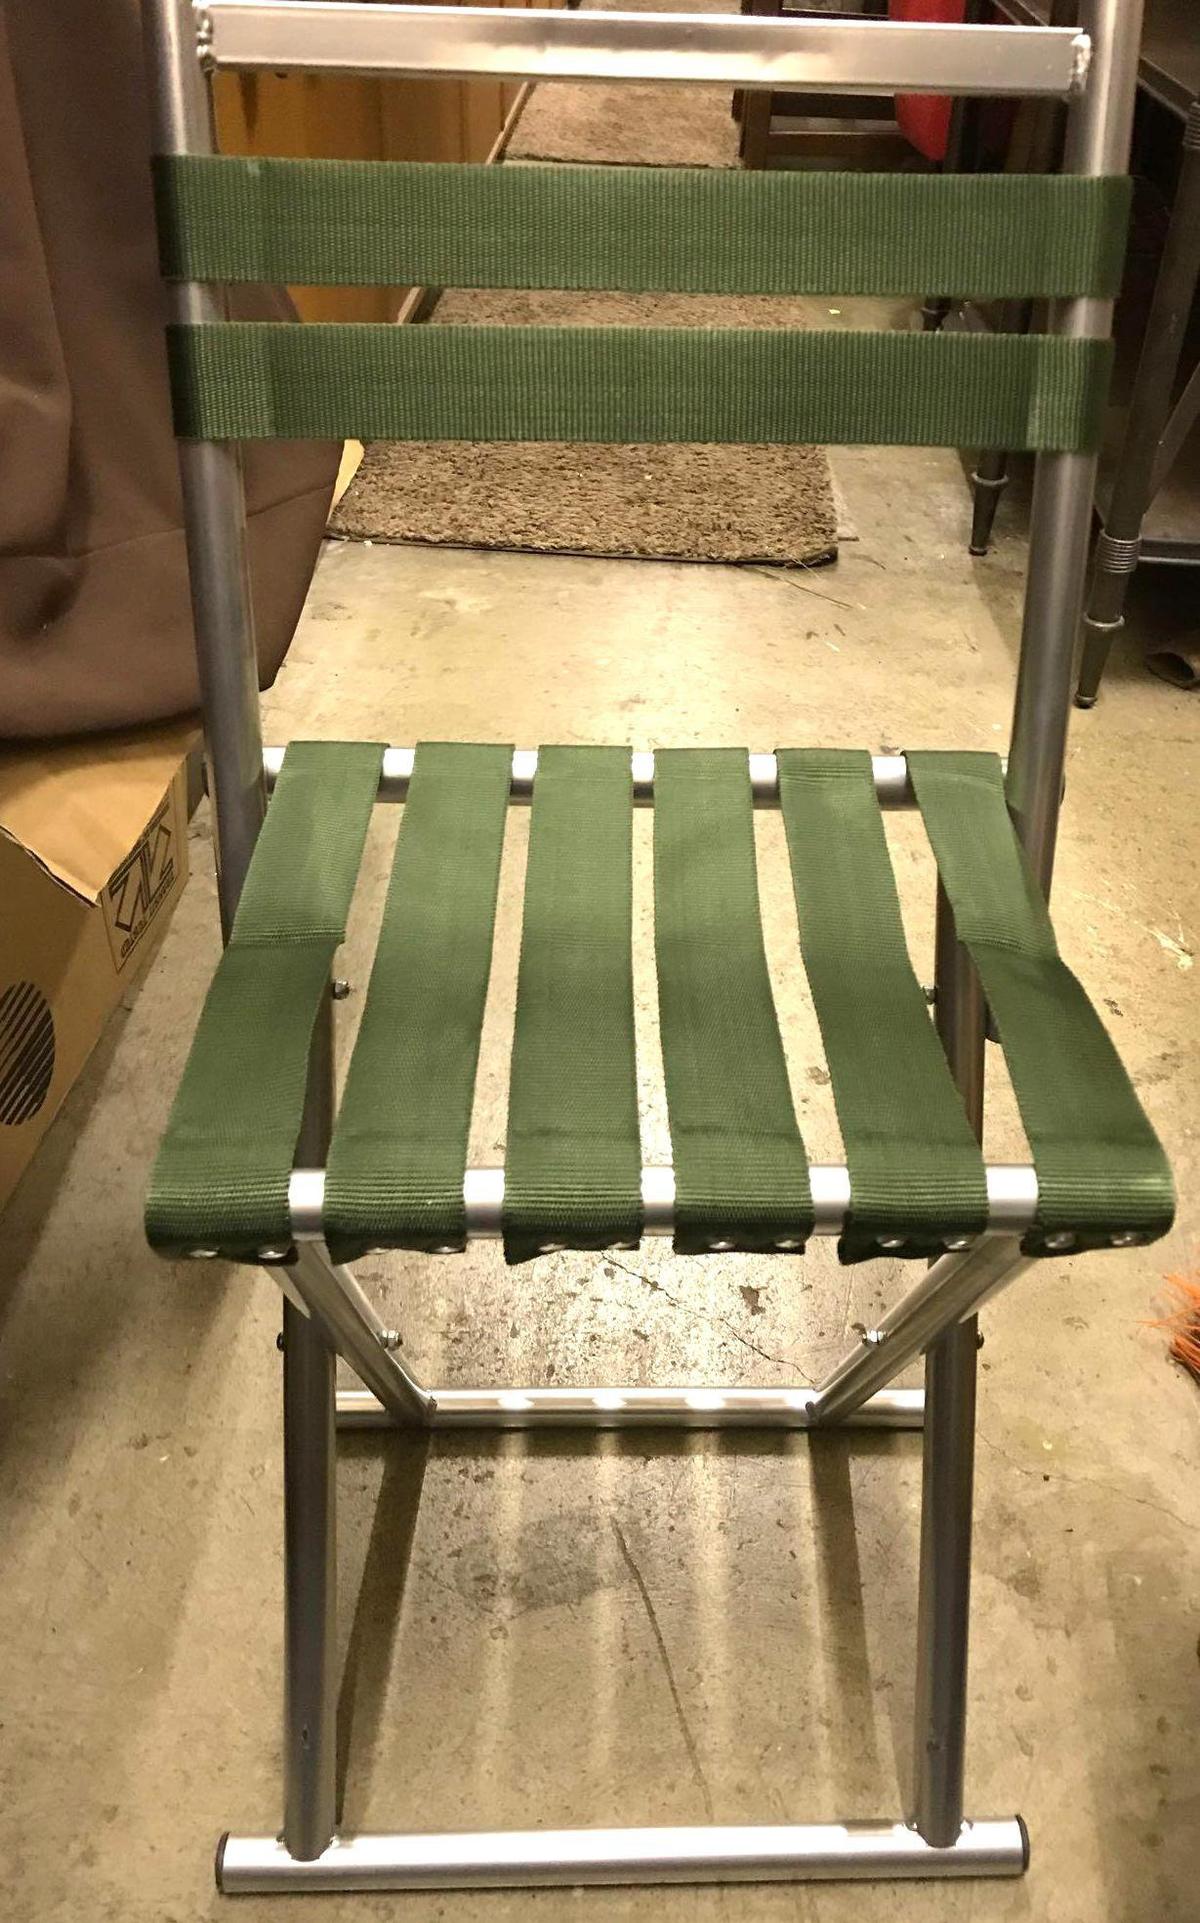 4 New Folding Chairs